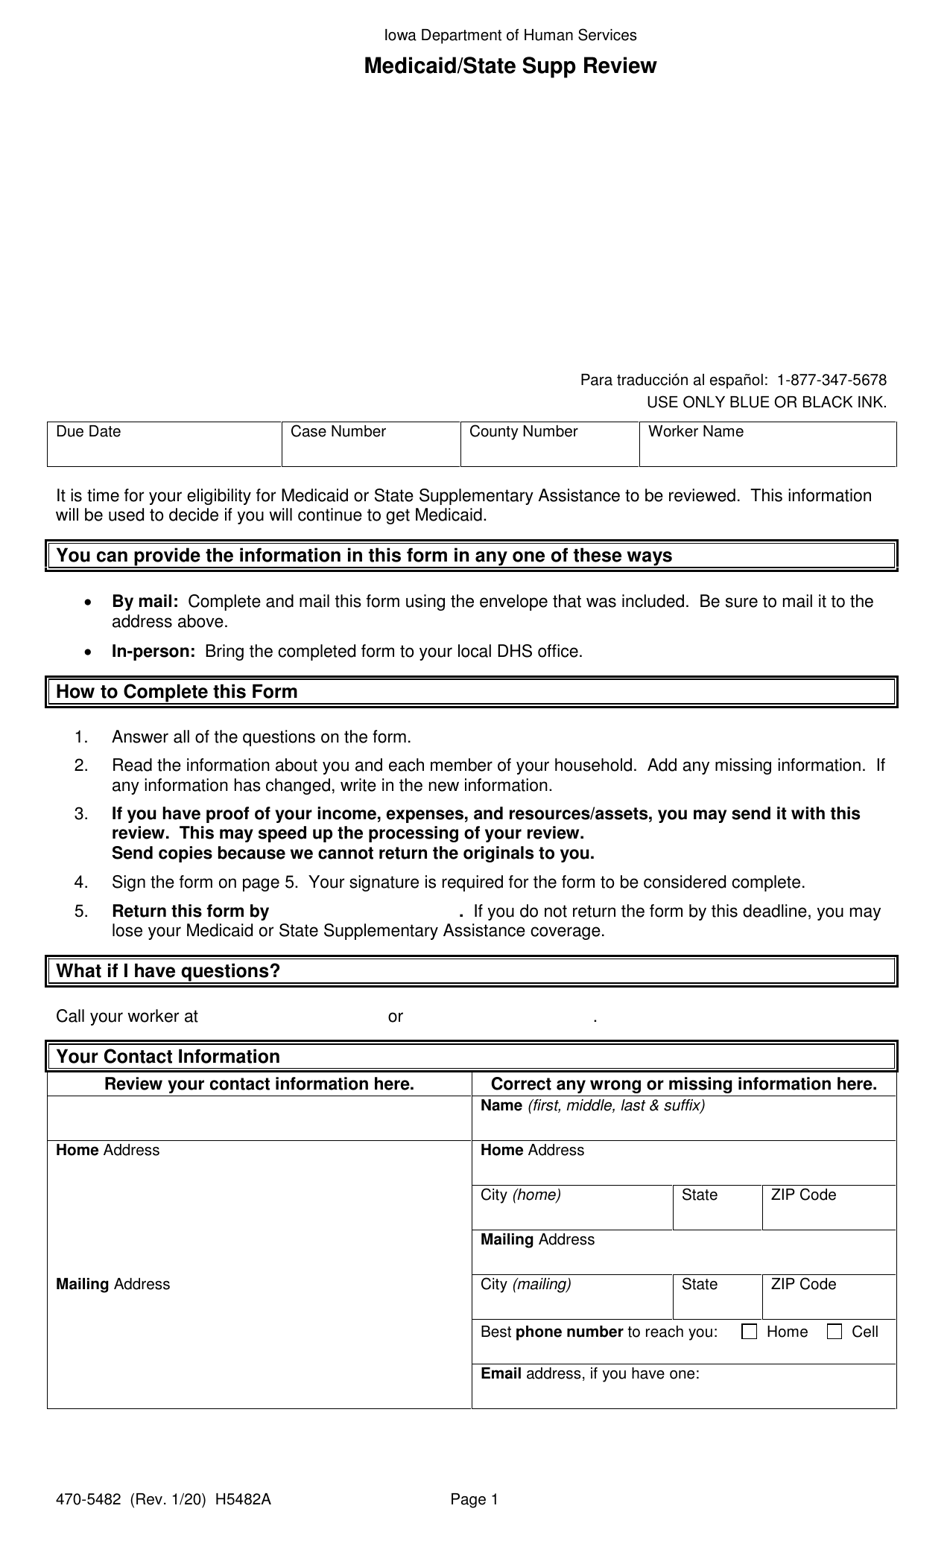 Form 470-5482 Medicaid / State Supp Review - Iowa, Page 1